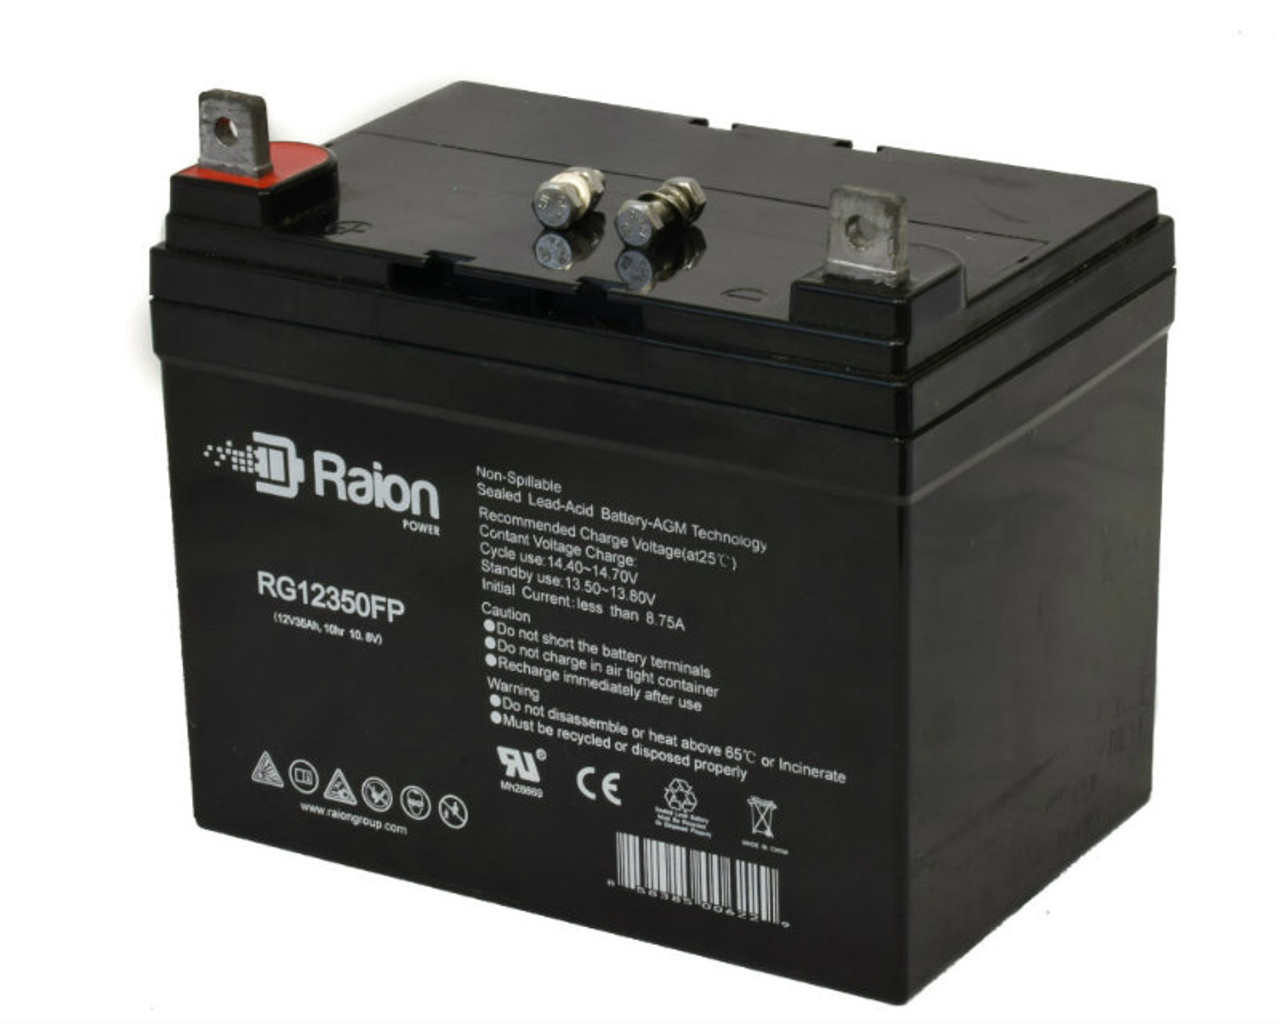 Raion Power Replacement 12V 35Ah RG12350FP Battery for J.I. Case & Case Ih Lawn 220